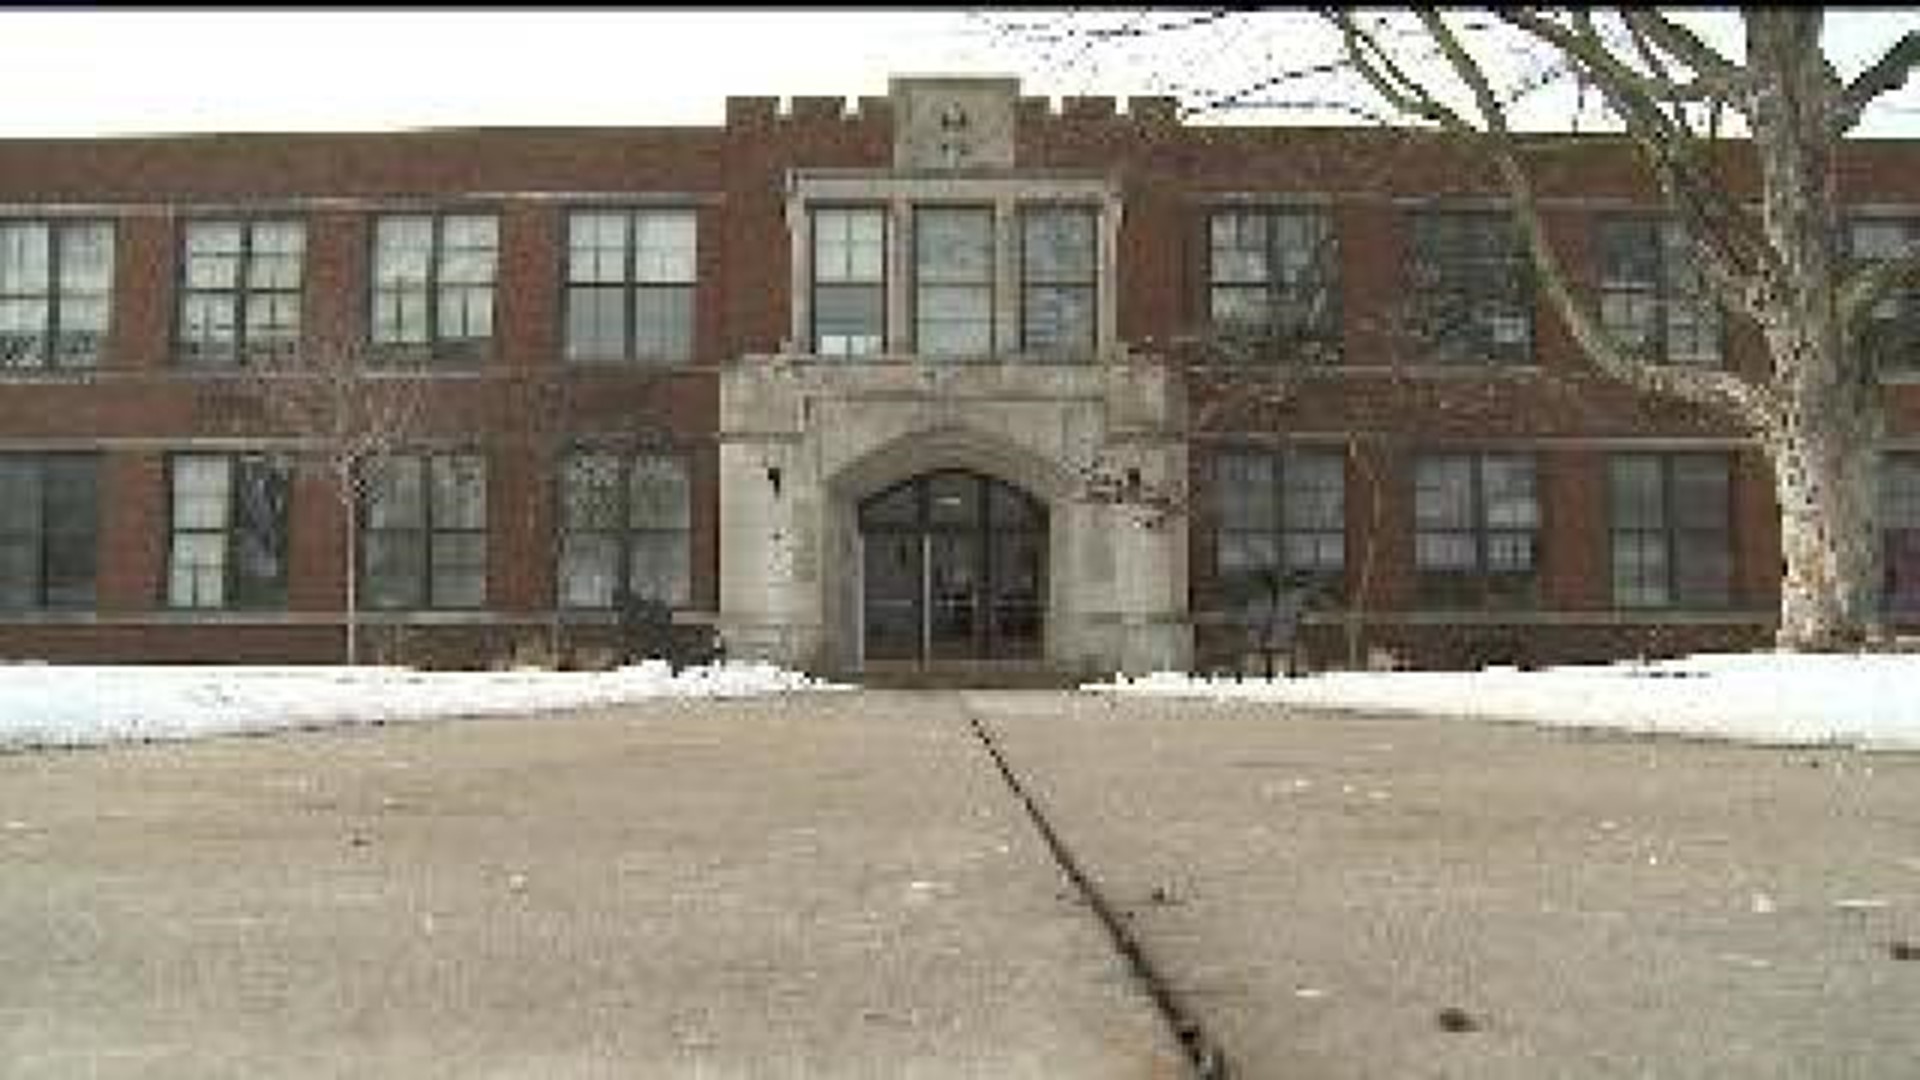 Davenport parents face troubles enrolling their kids in school